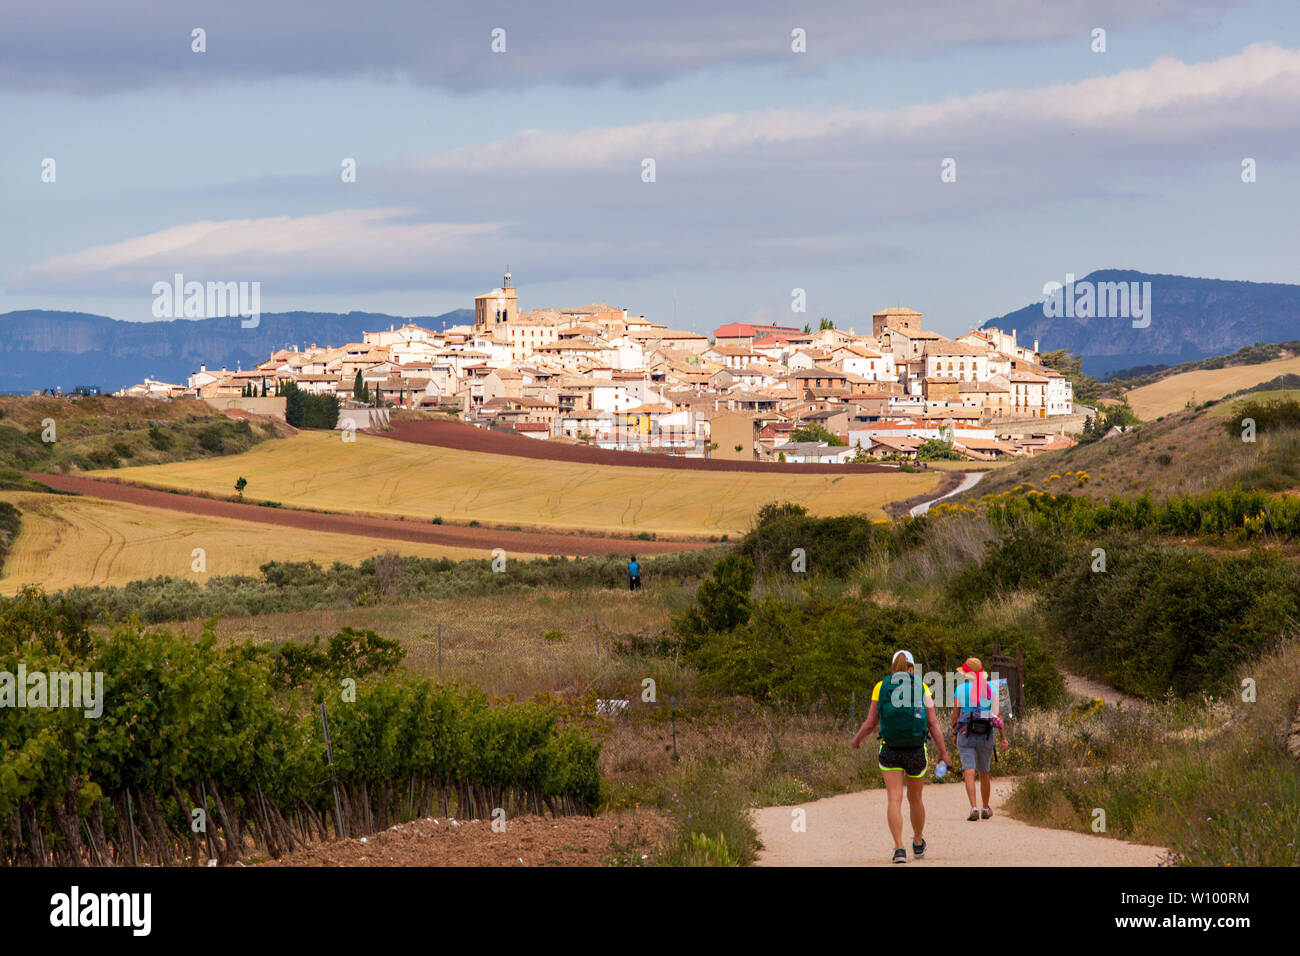 Pilgrims walking in the Spanish countryside on the Camino de Santiago the way of St James approaching the village of Cirauqui Navarra Spain Stock Photo